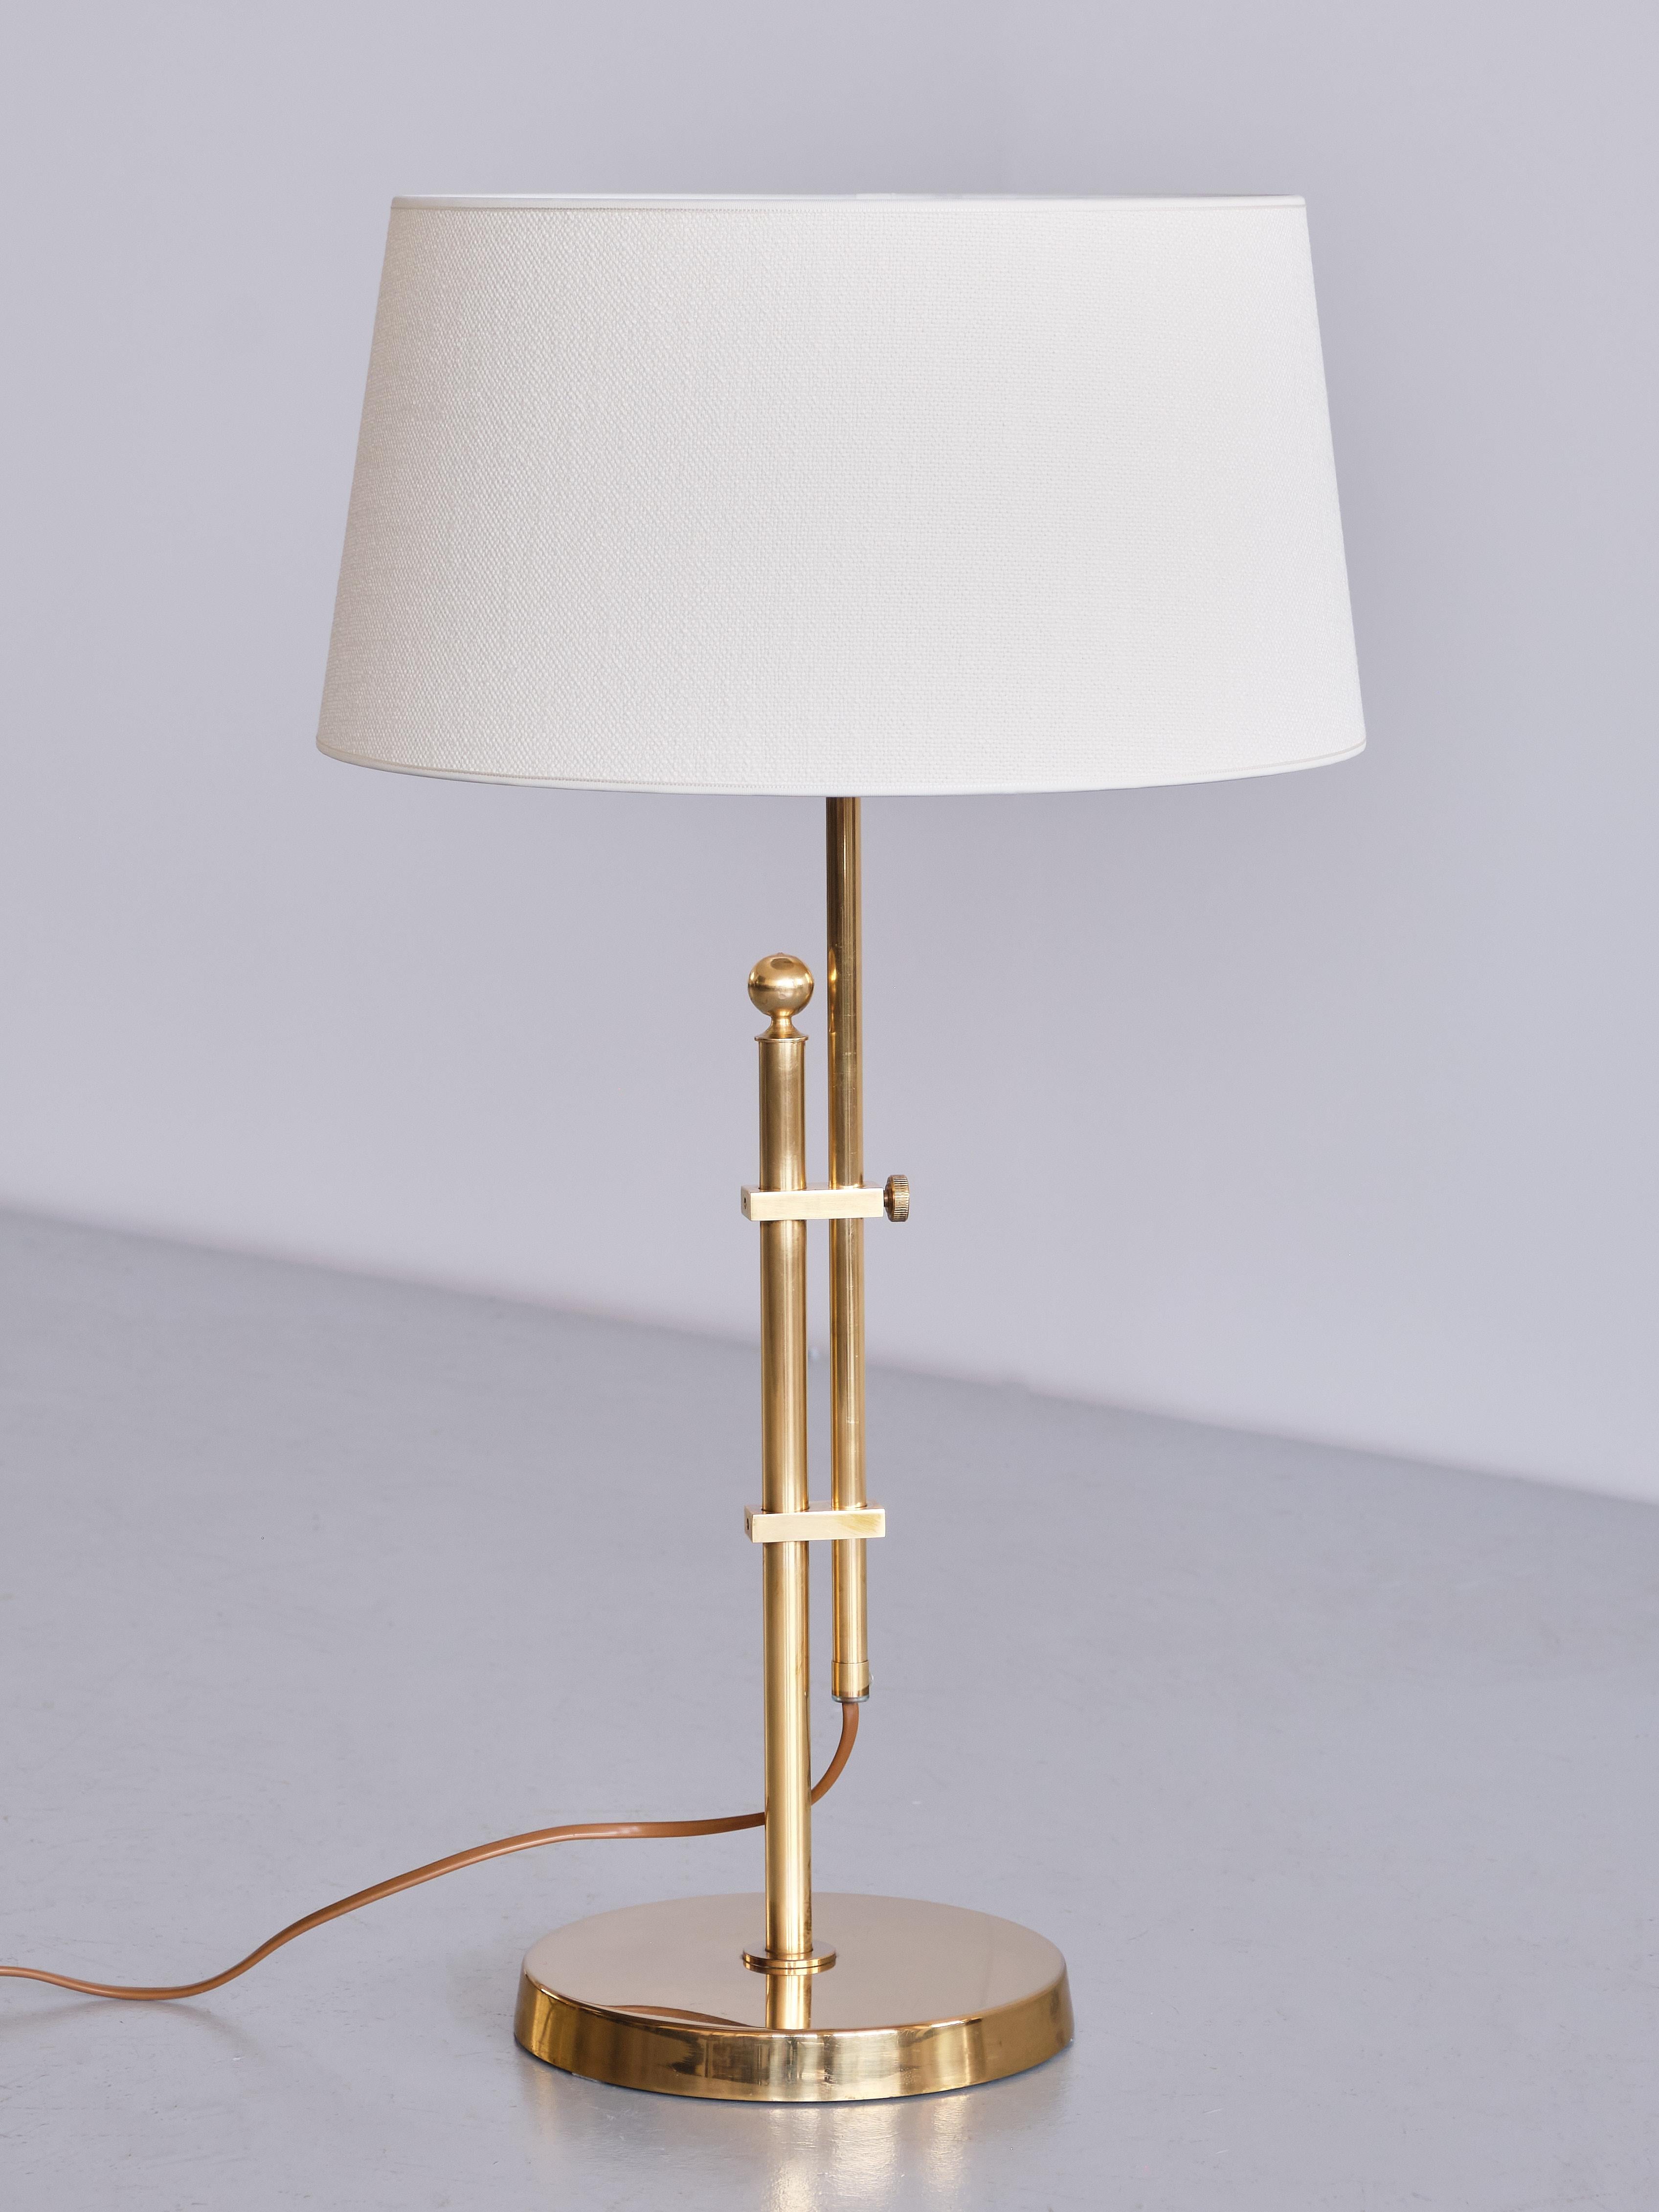 Bergboms B-131 Height Adjustable Table Lamp in Brass, Sweden, 1950s In Good Condition For Sale In The Hague, NL